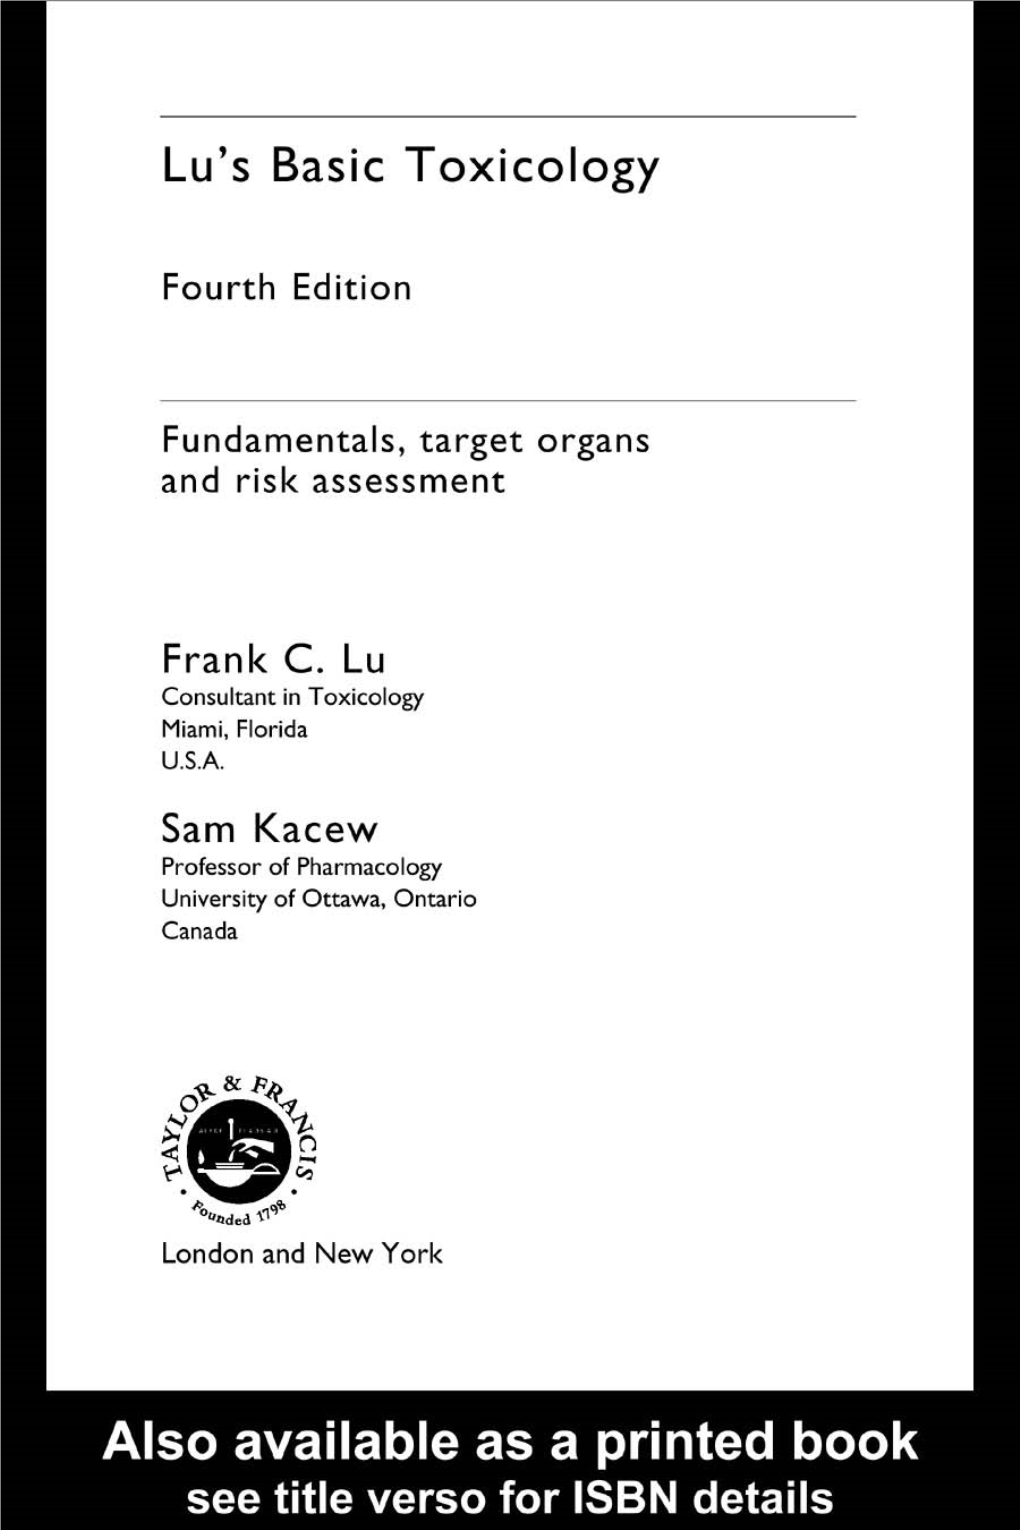 Lu's Basic Toxicology: Fundamentals, Target Organs and Risk